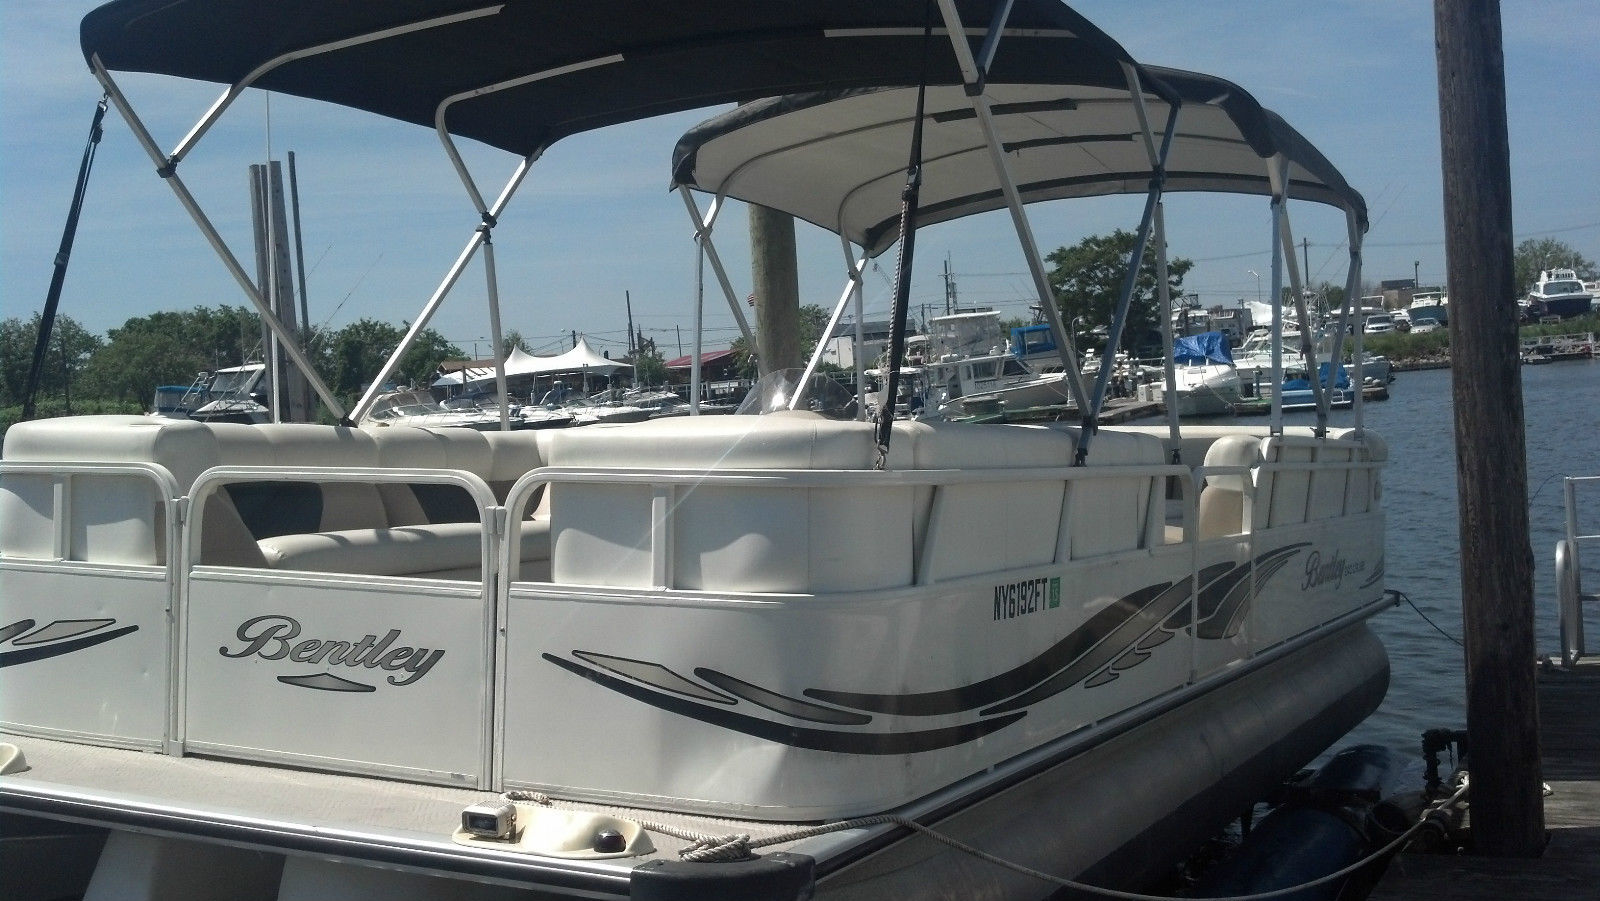 Boat is in great shape 2008 Pontoon boat 24' with a 50 mercury 4 strok...